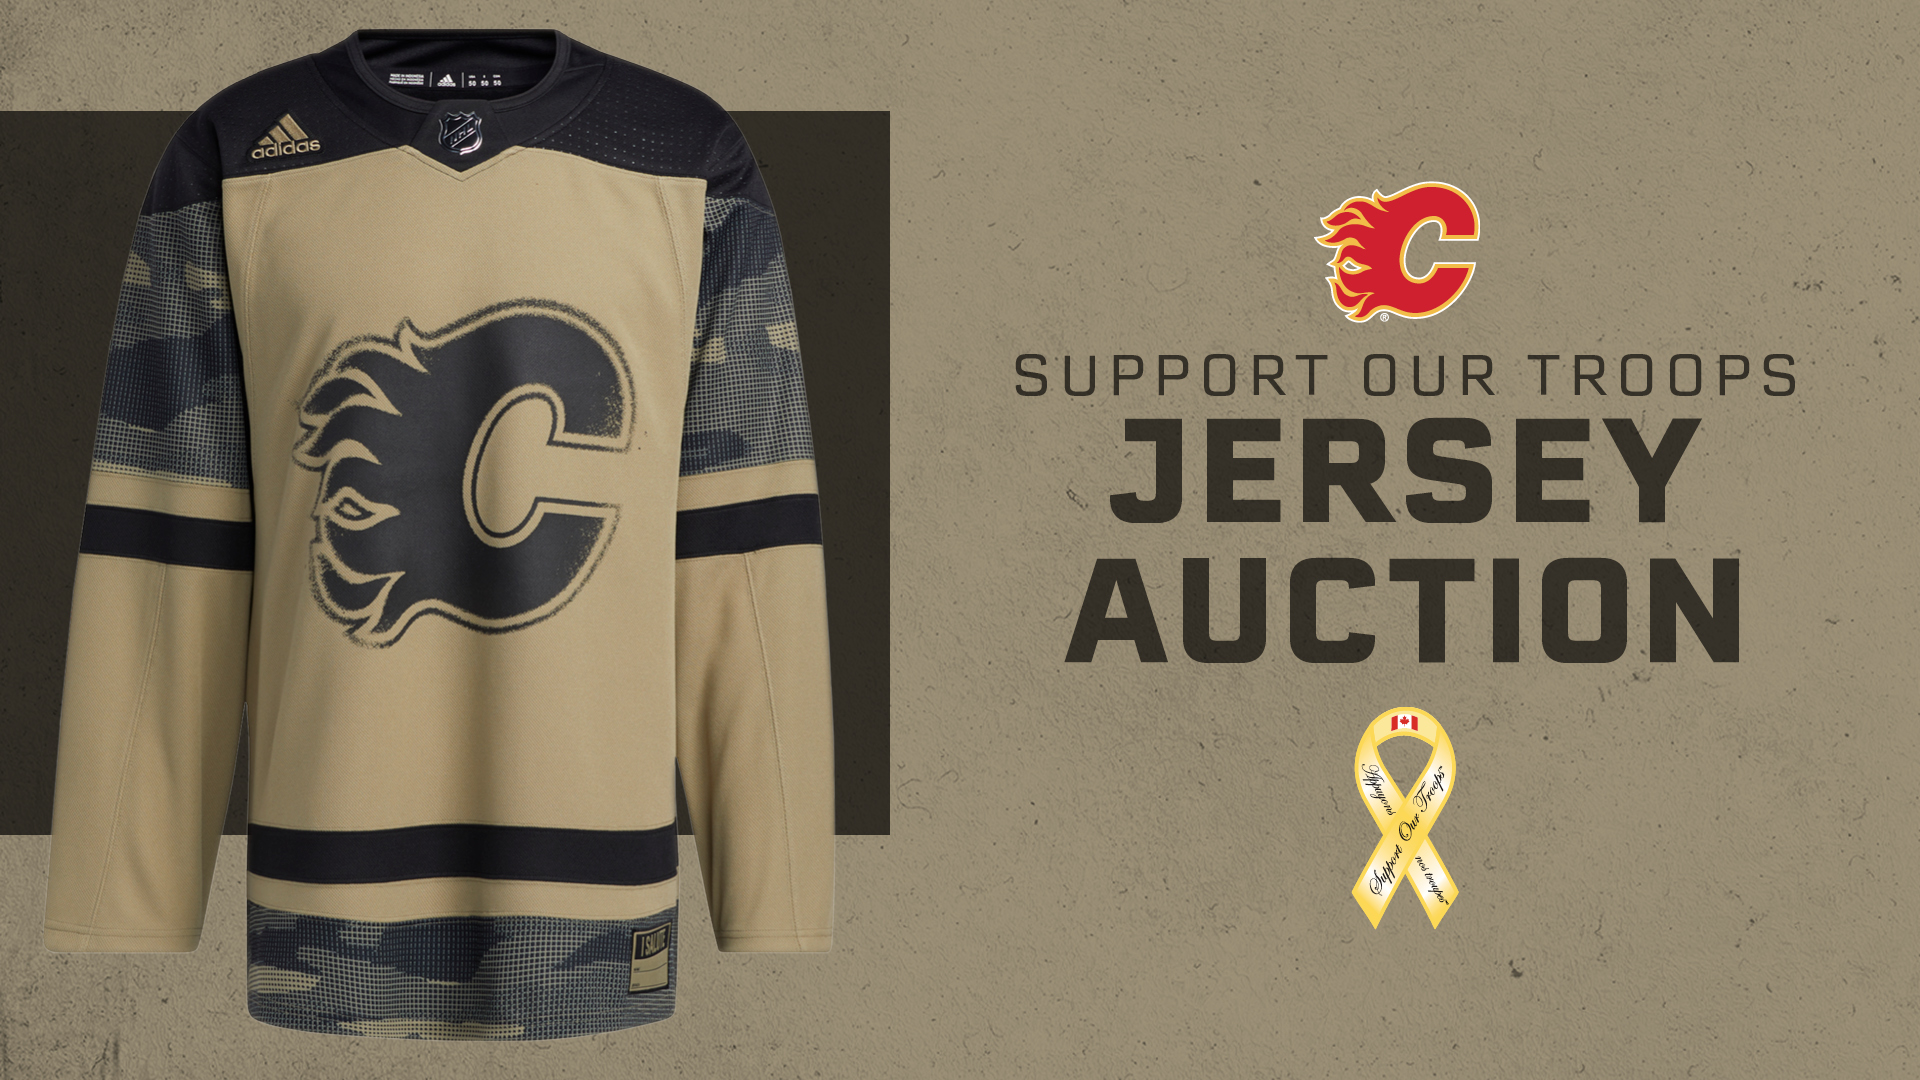 Calgary Flames on X: Thanks to you, over the last month we have set TWO  new jersey auction records: our Indigenous Celebration and Pride warm-up  jerseys are our most successful jersey auctions